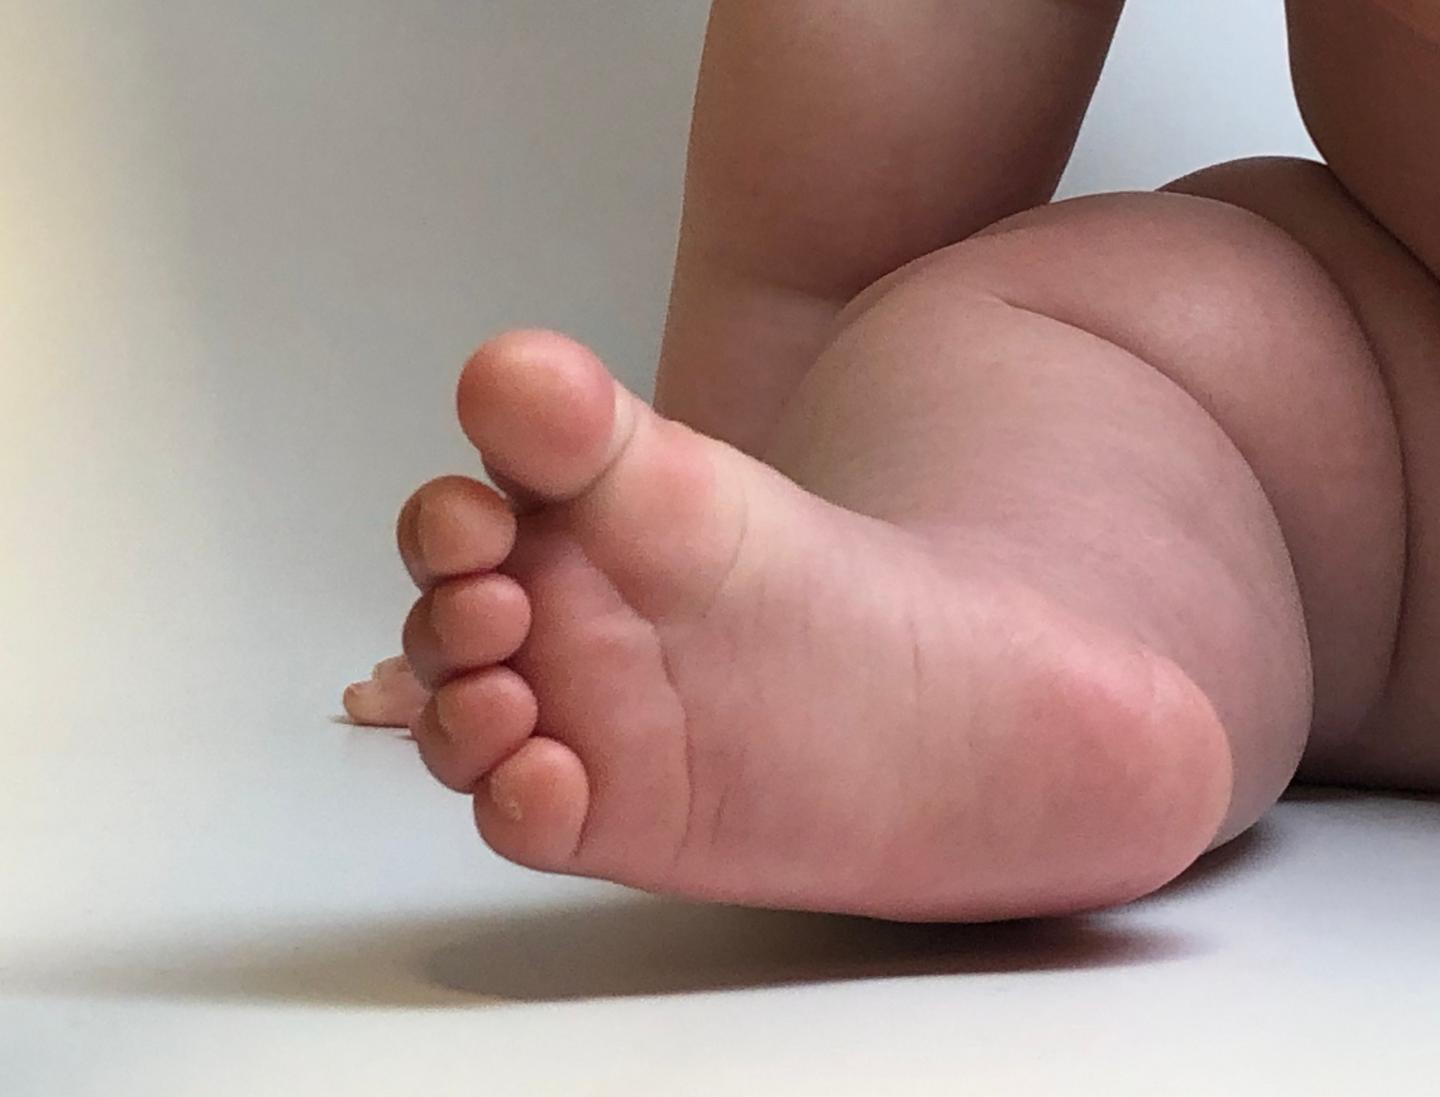 An infant's leg and foot.